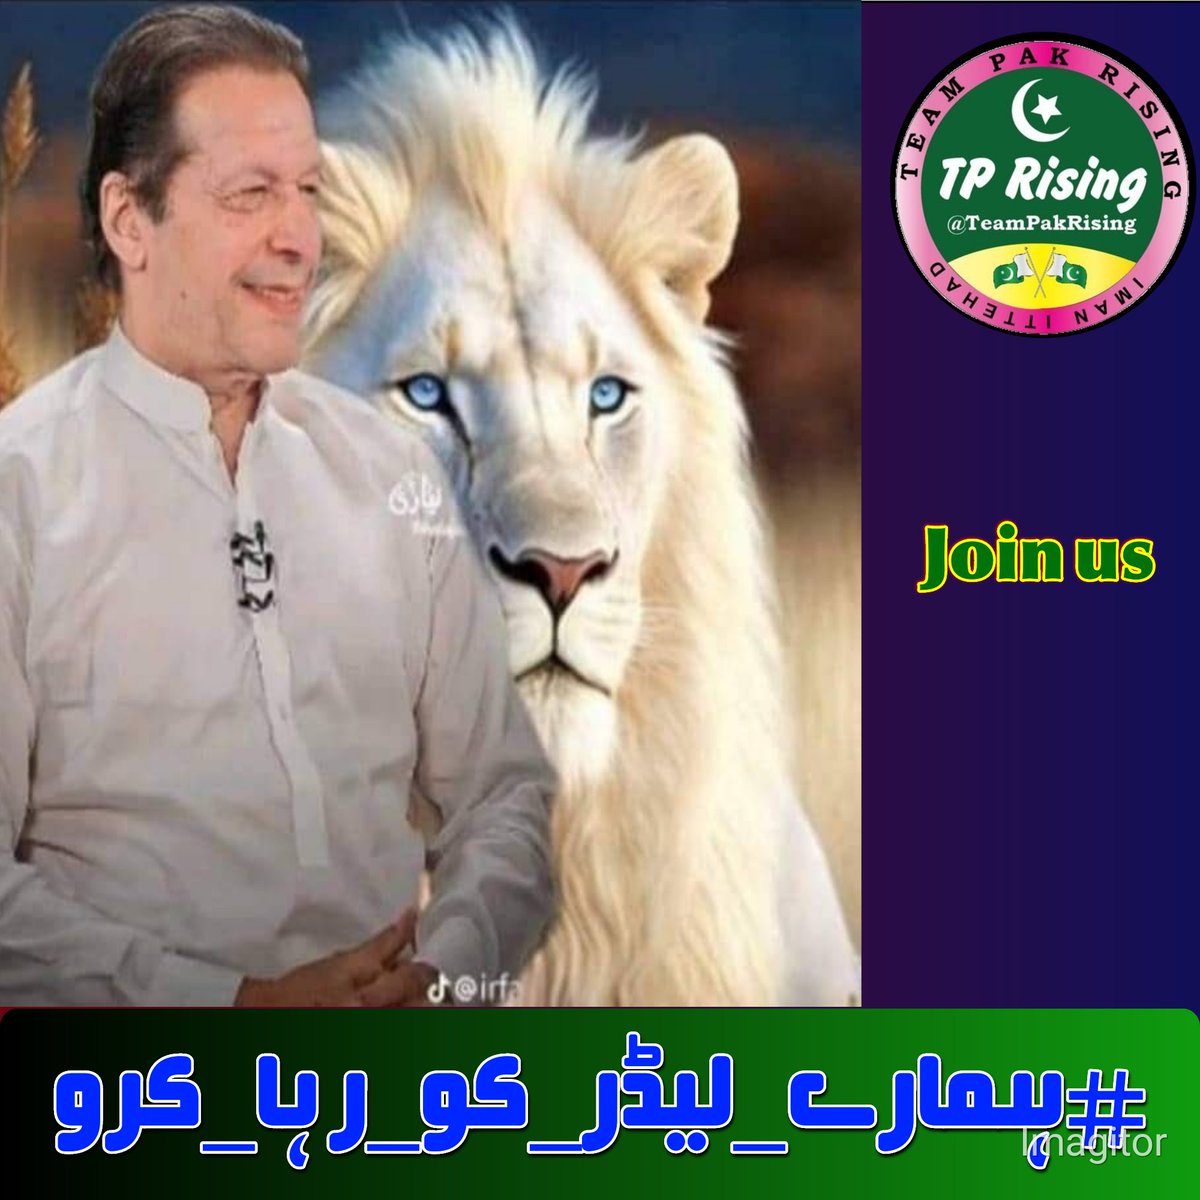 The unjust detention of our leader is a stain on democracy
@TeamPakPower

#ہمارے_لیڈر_کو_رہا_کرو